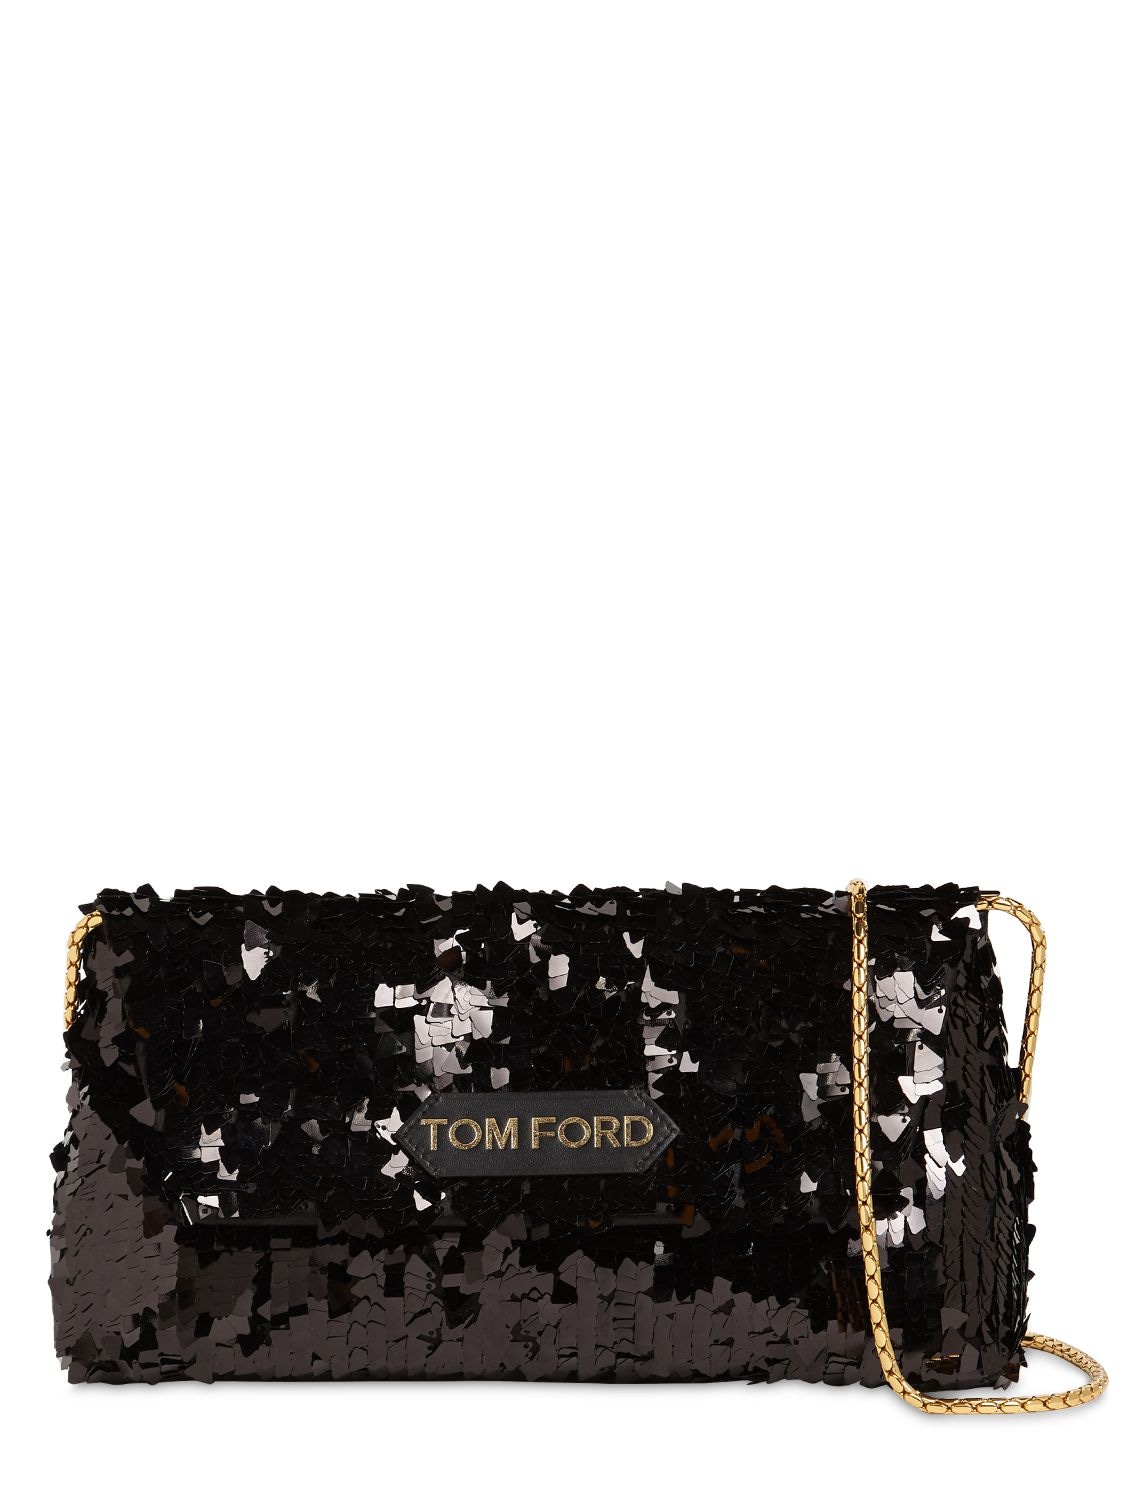 Tom Ford Label Small Sequin Chain Shoulder Bag In Black